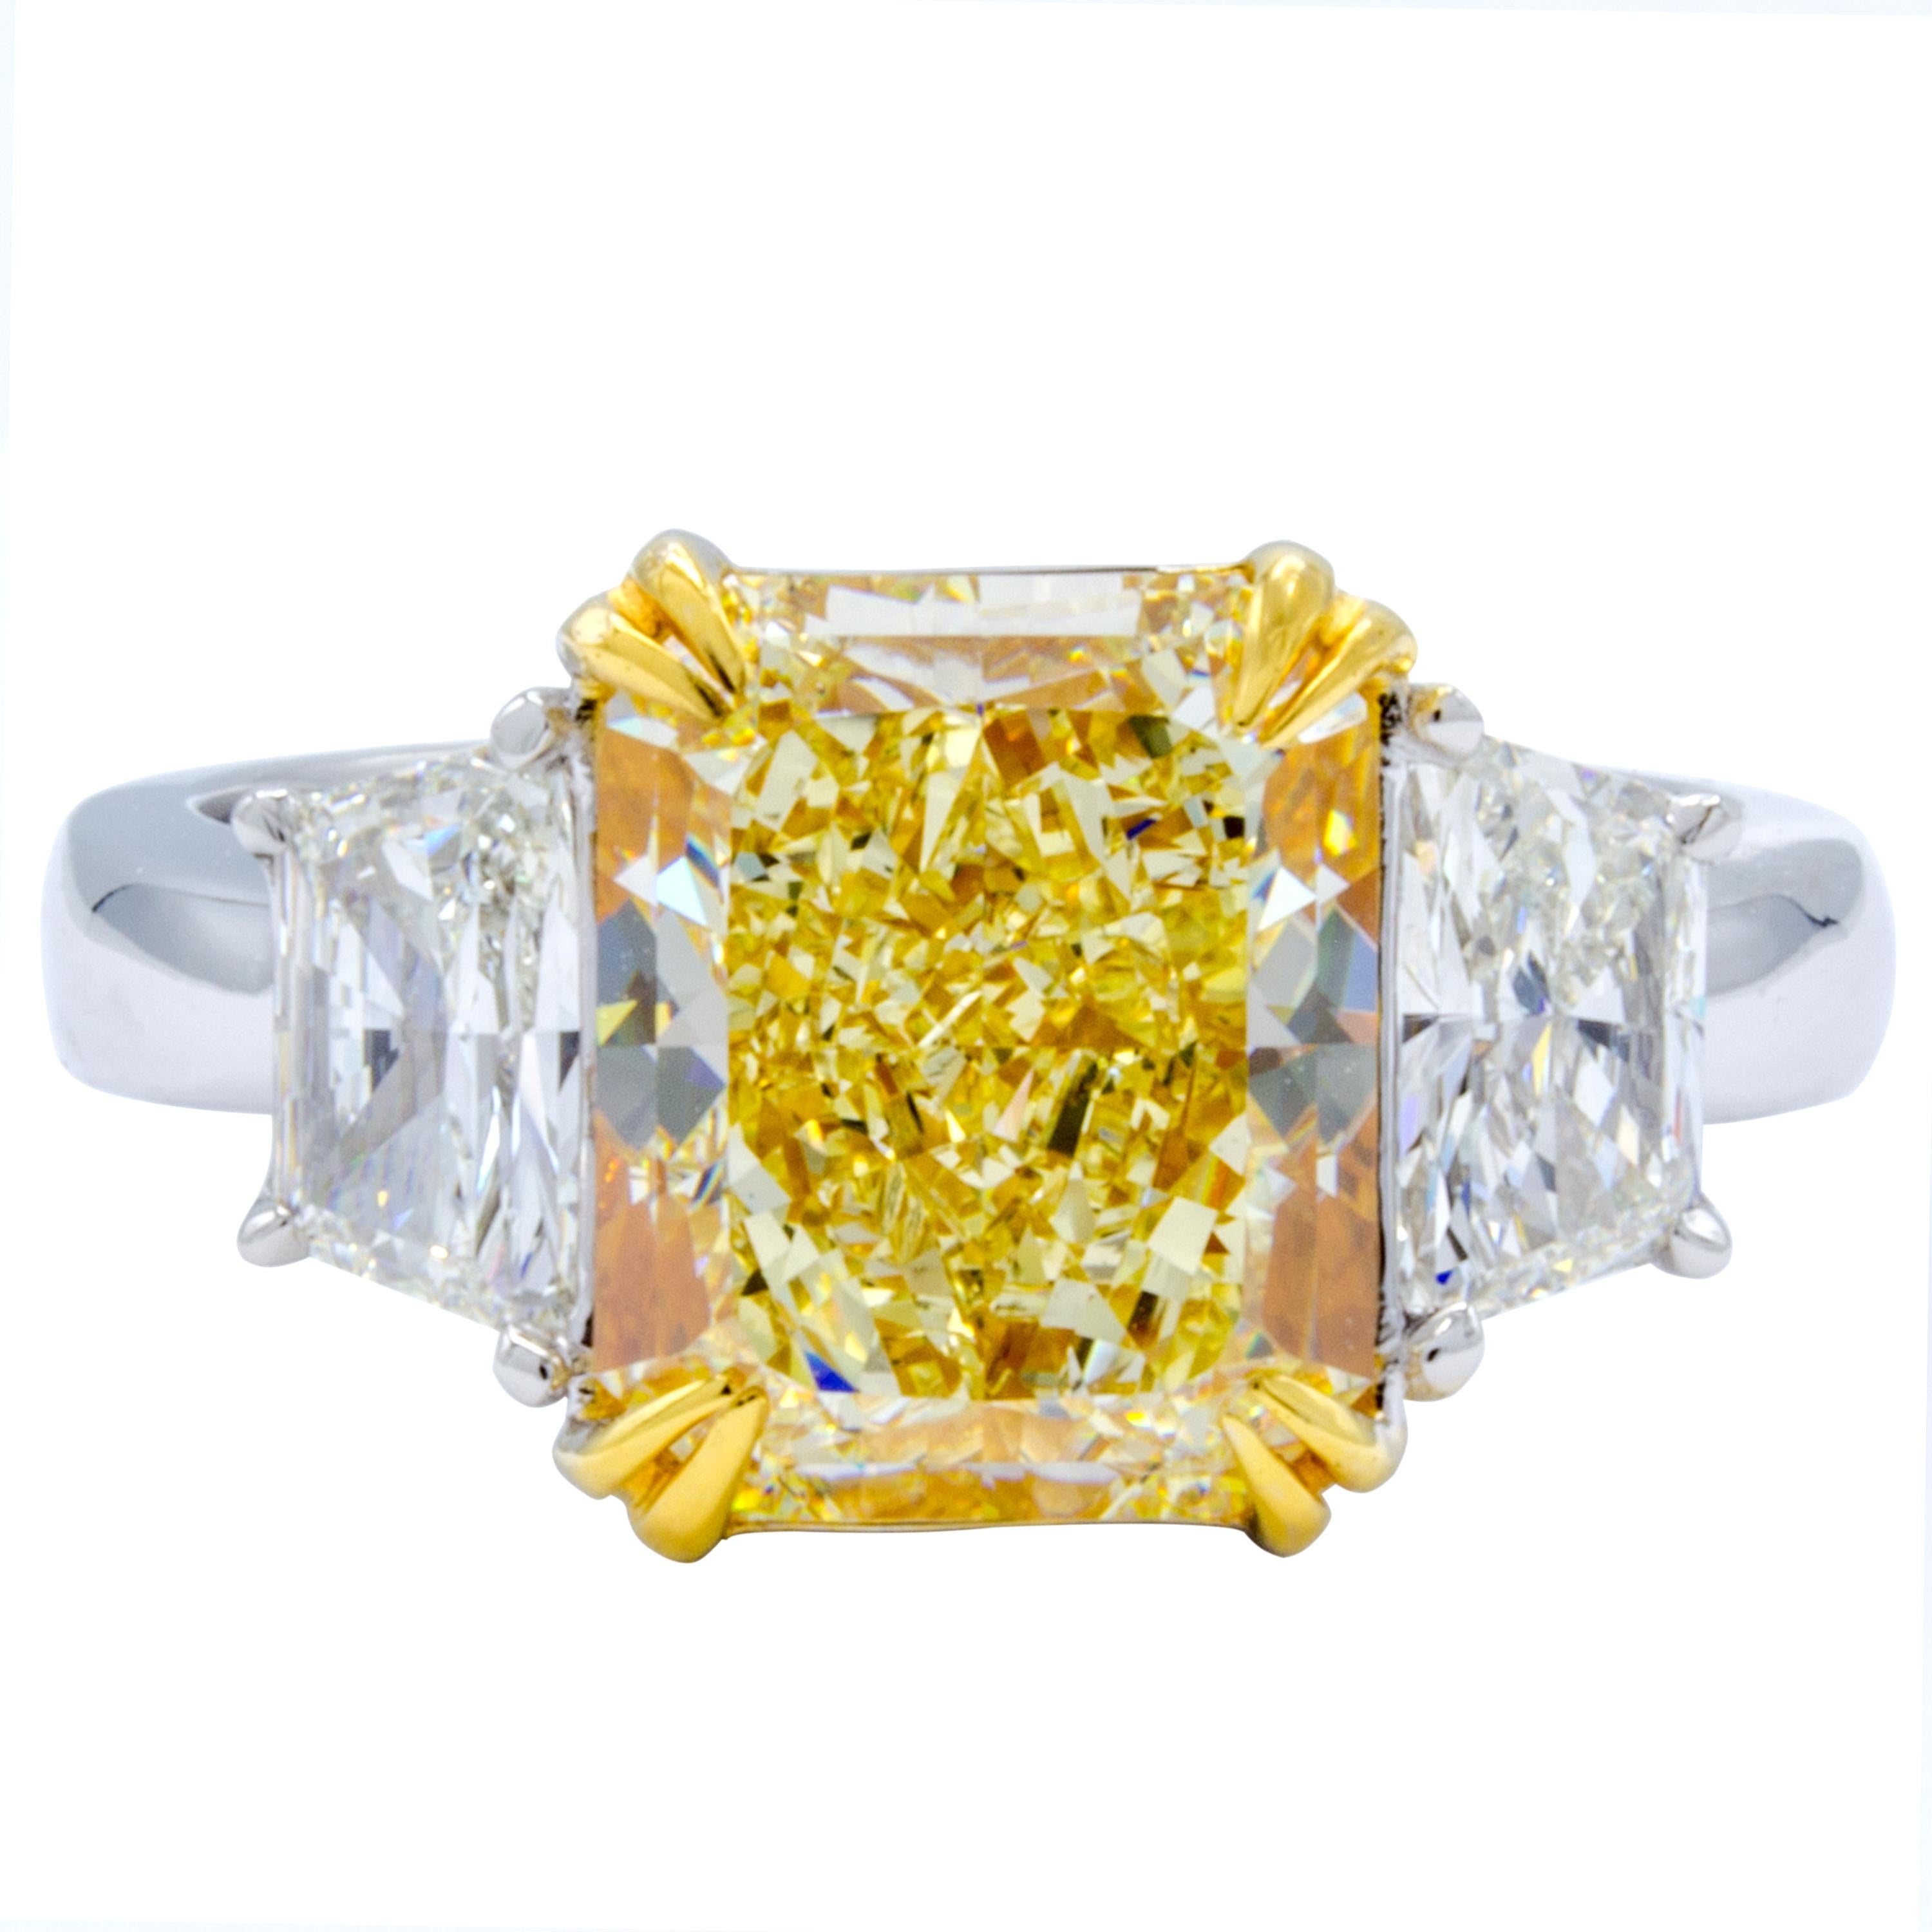 This glistening Rosenberg Diamonds & Co. diamond engagement ring sets a beautiful GIA certified radiant cut natural fancy light yellow diamond at front and center within a band of pure platinum and 18Kt yellow gold. The center stone features an